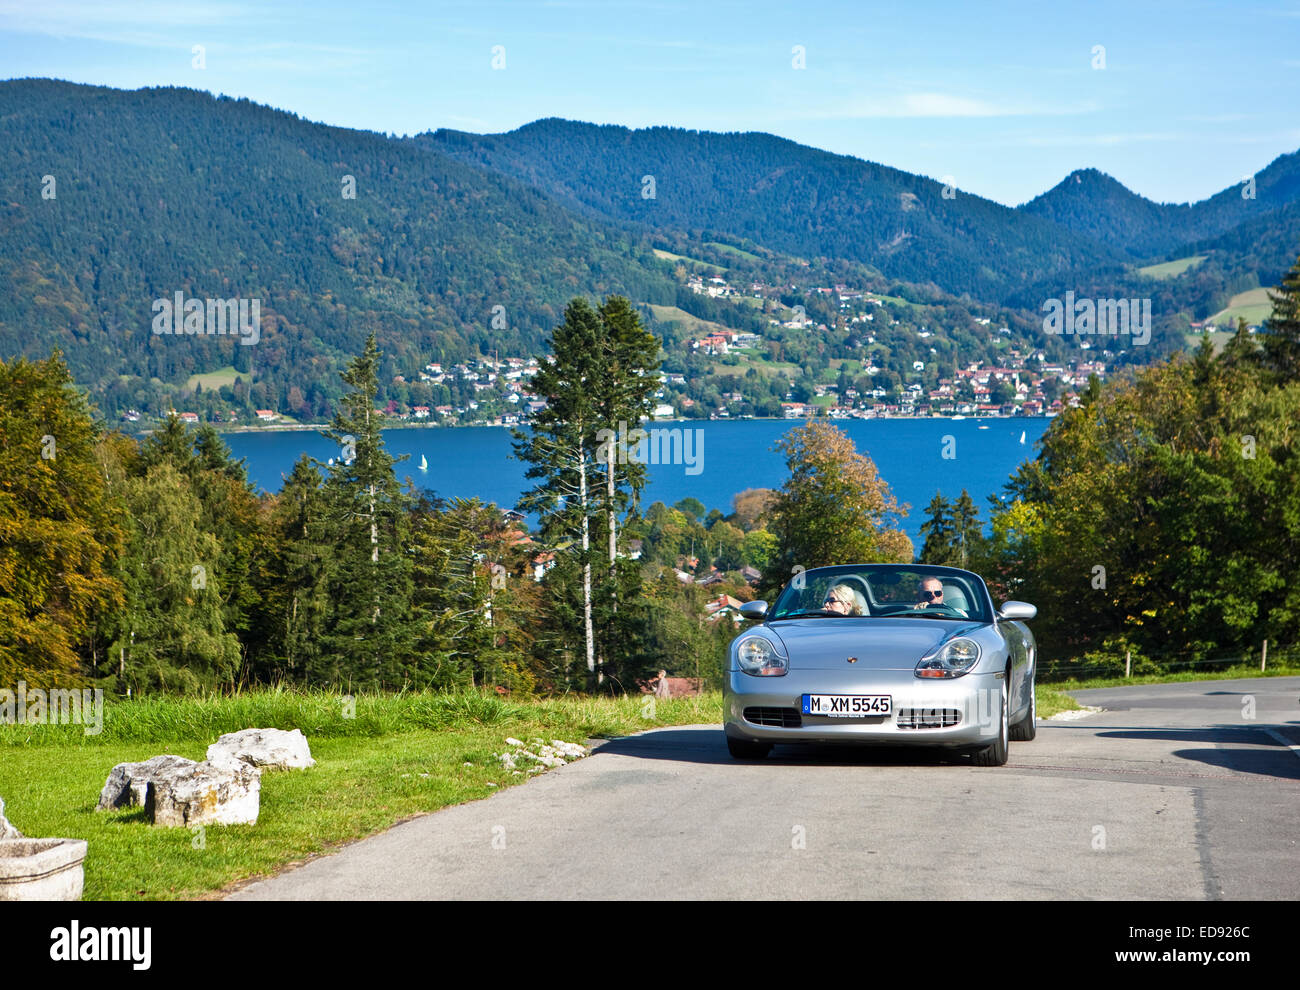 Tegernsee, Bavaria, Germany. A Porsche car in the foreground Stock Photo